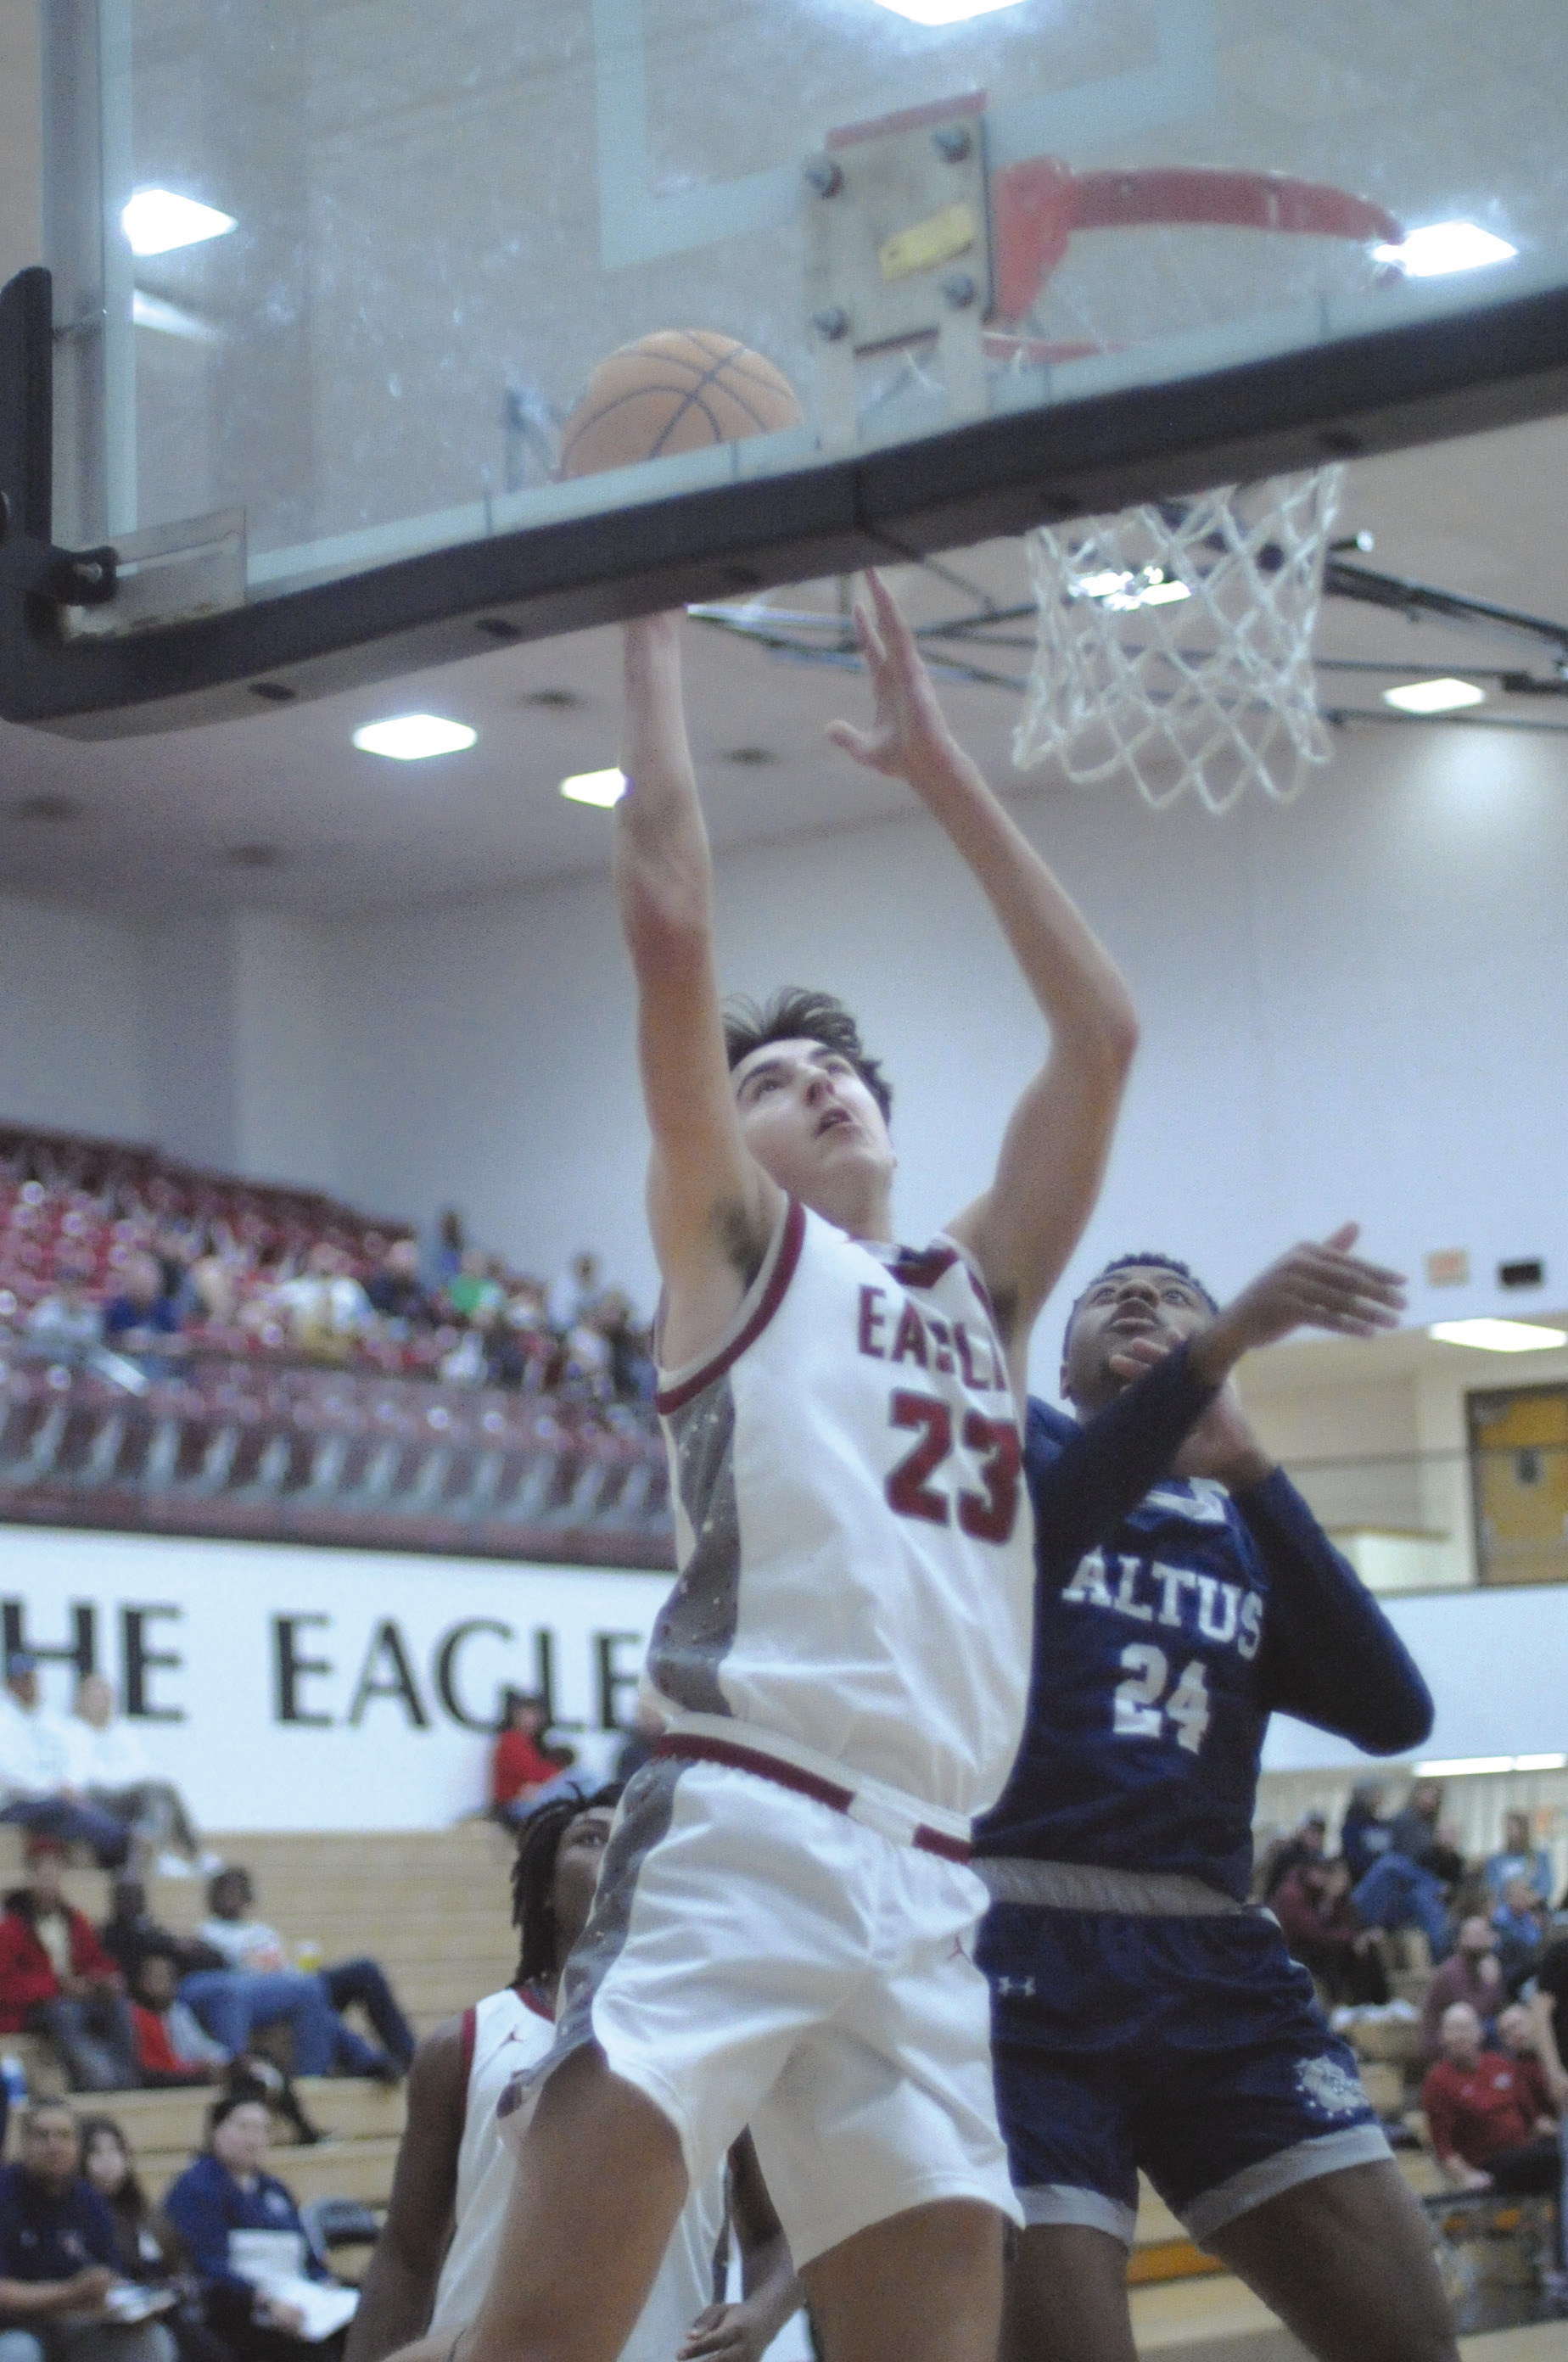 Ethan Sage goes up for a layup during Saturday’s game against Altus. He scored 15 points in teh game. Josh Burton/WDN